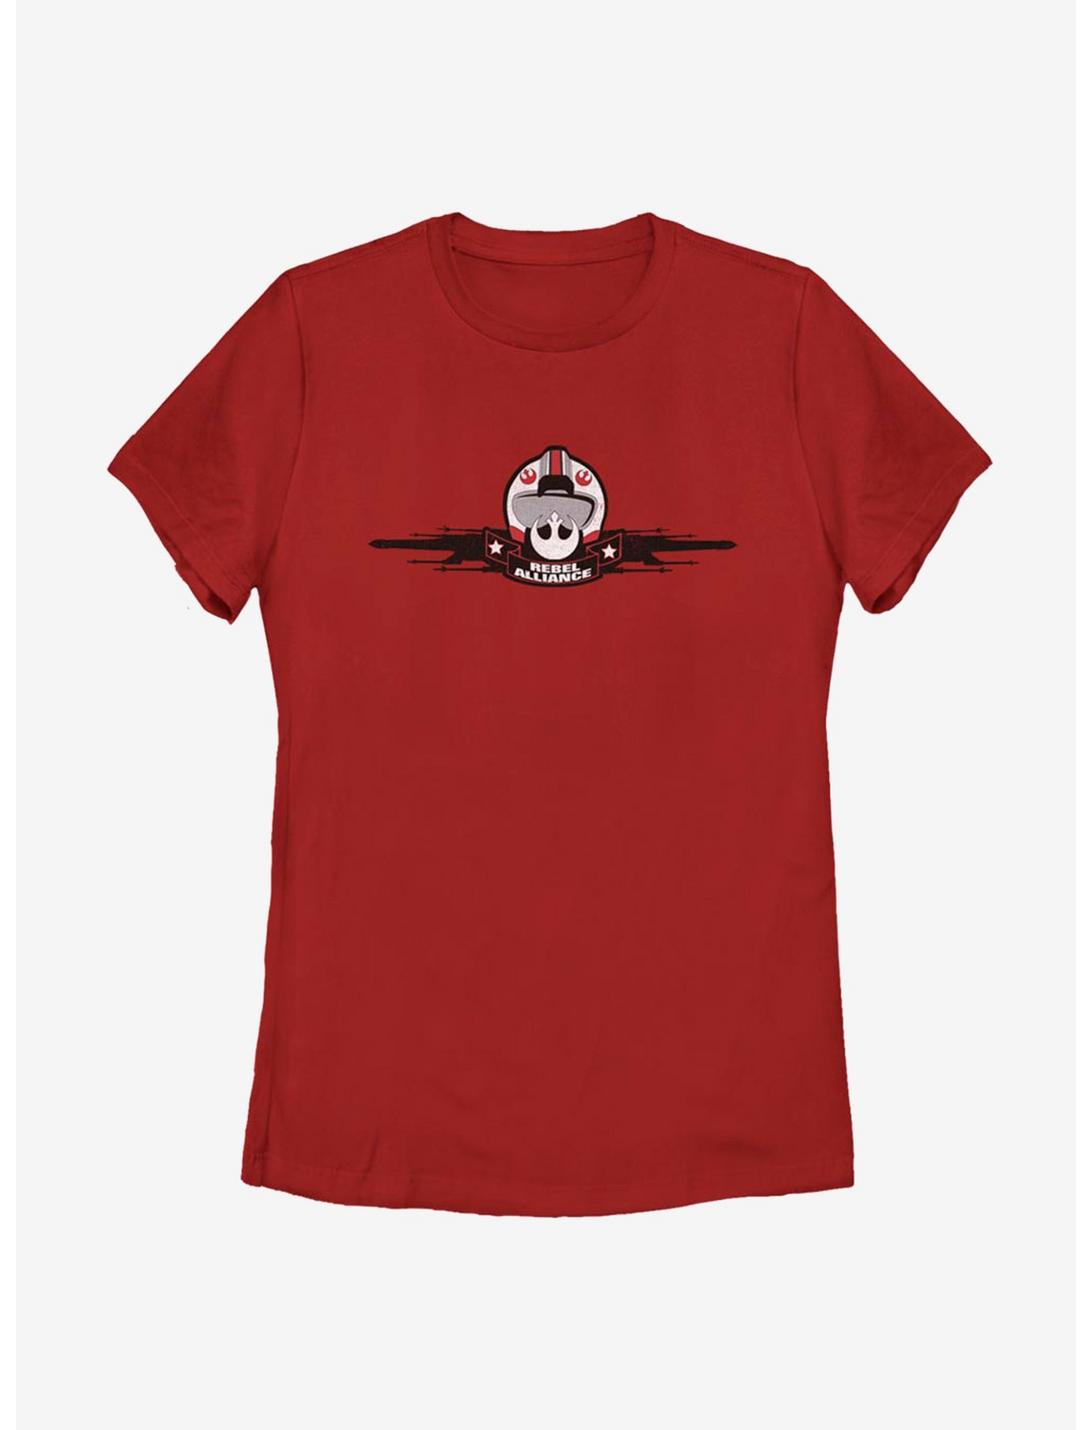 Star Wars Red Rebel Alliance Squadron Womens T-Shirt, RED, hi-res